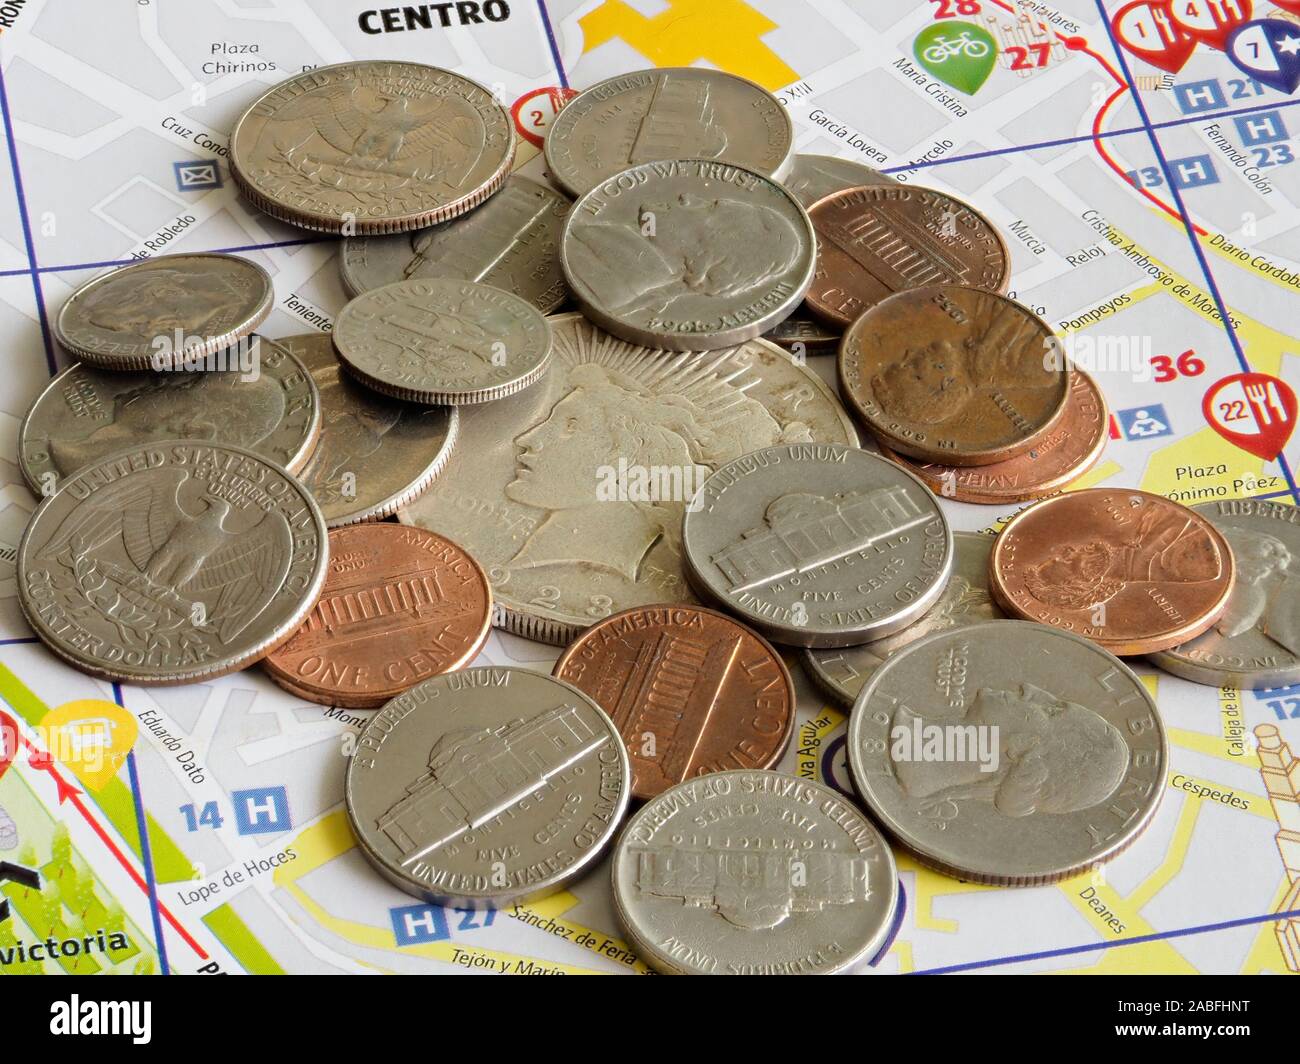 close-up stack of american coins on a map Stock Photo